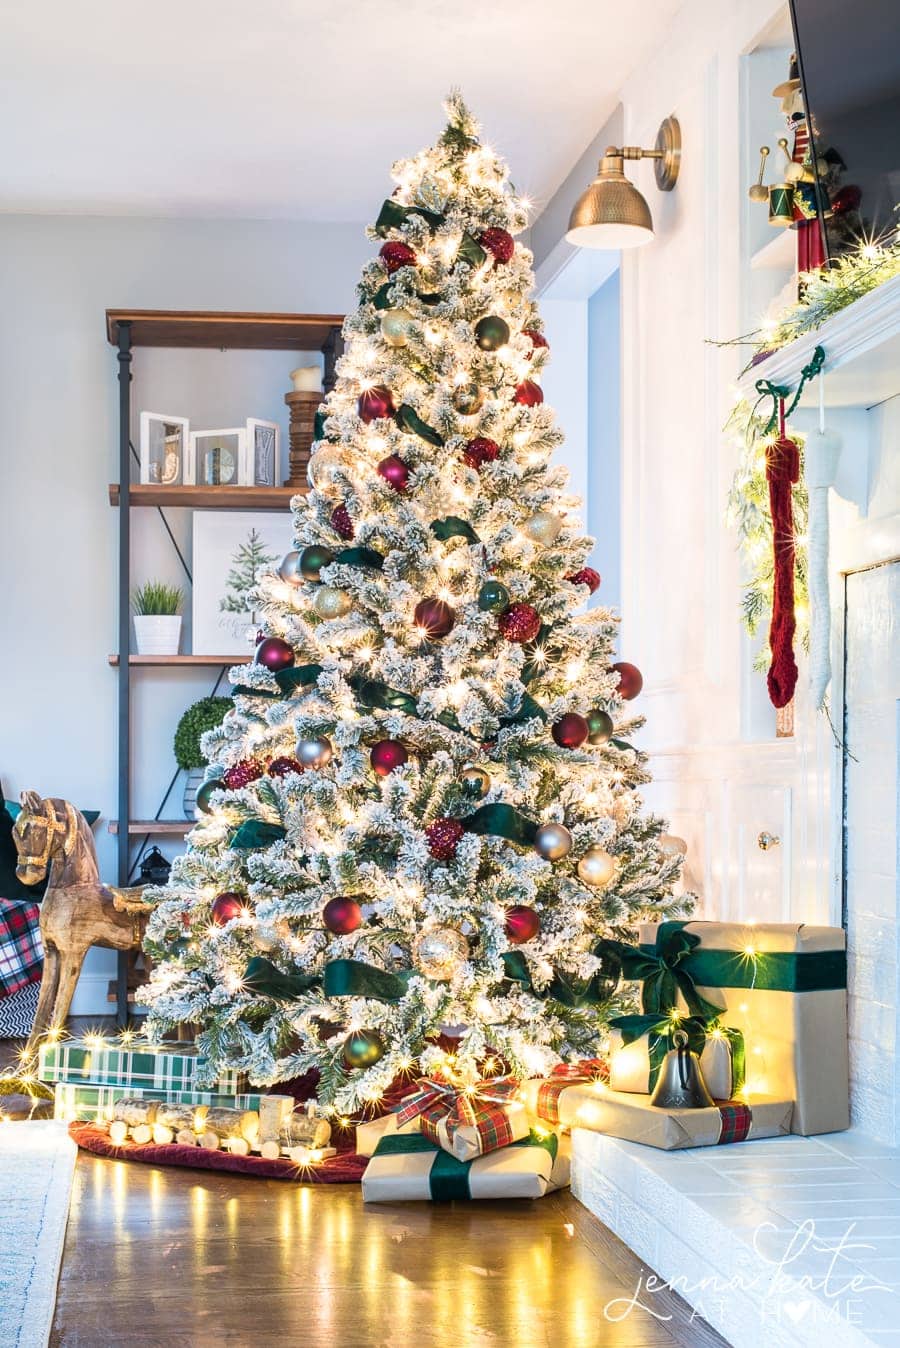 A Christmas tree with clear lights, burgundy ornaments and deep green ribbon